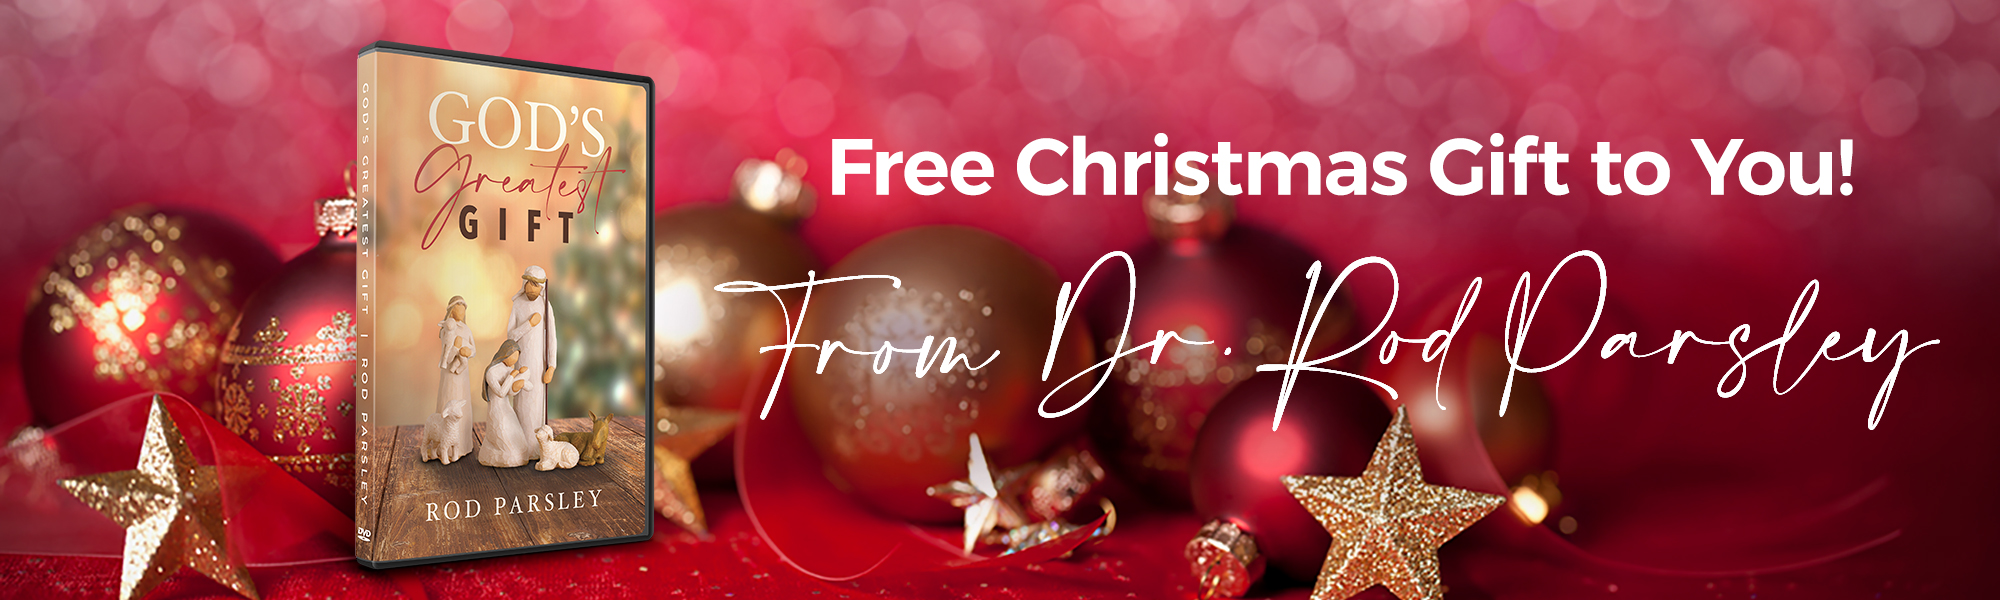 Free Christmas Gift to You! From Dr. Rod Parsley